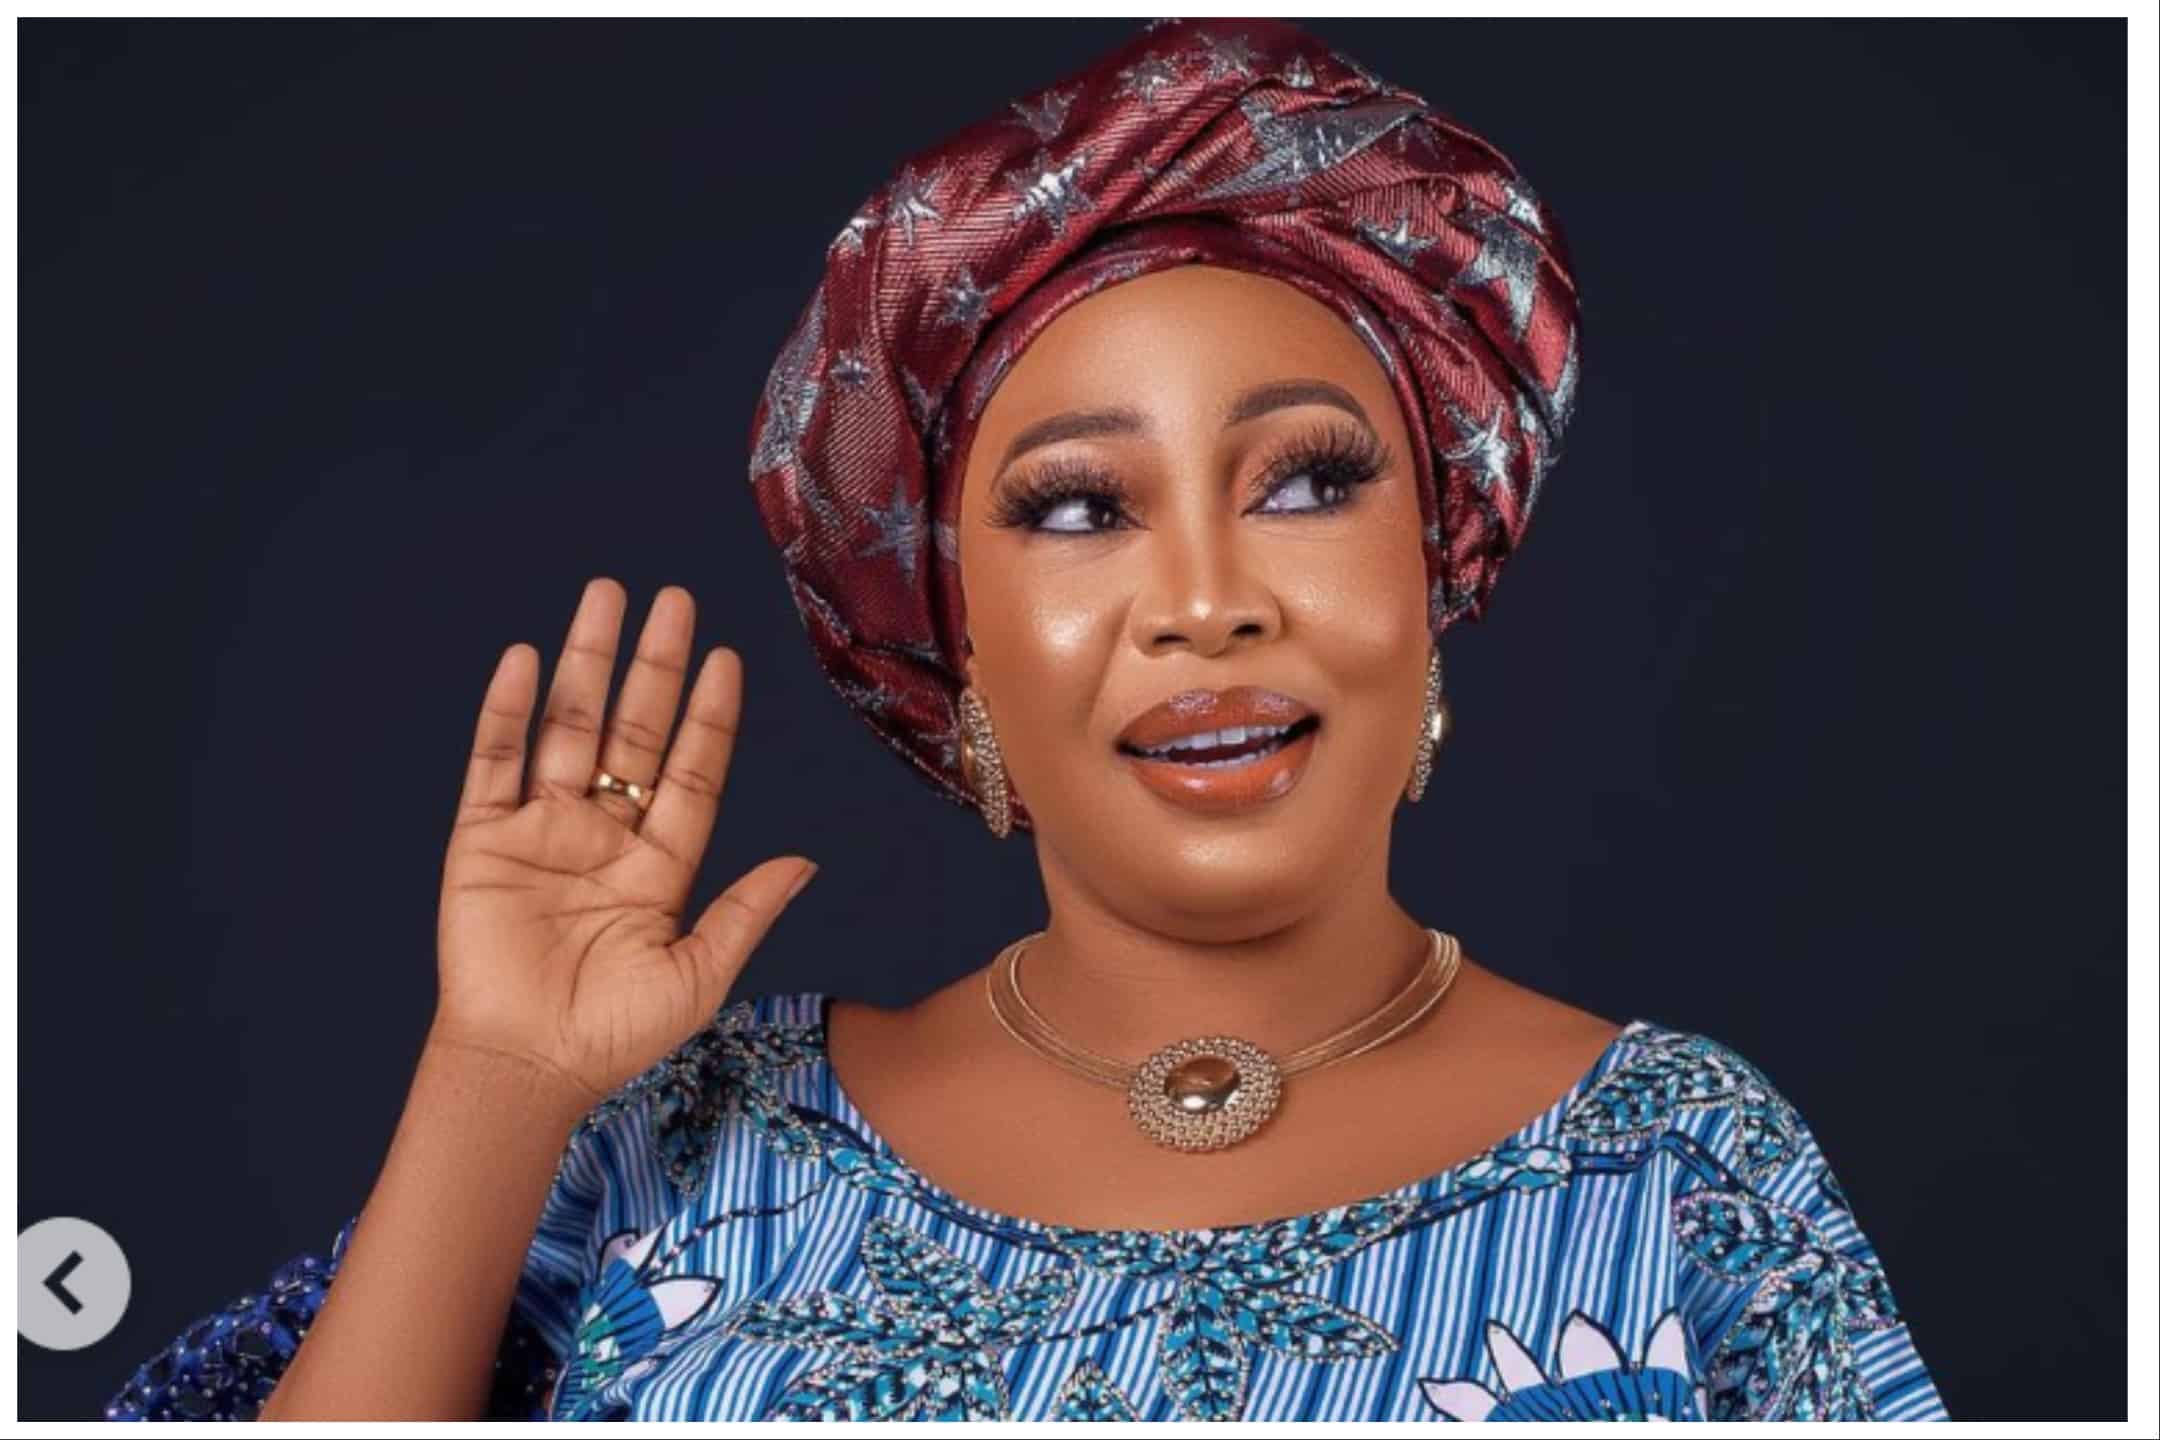 Read All The Latest News About Bimpe Akintunde On Naija News